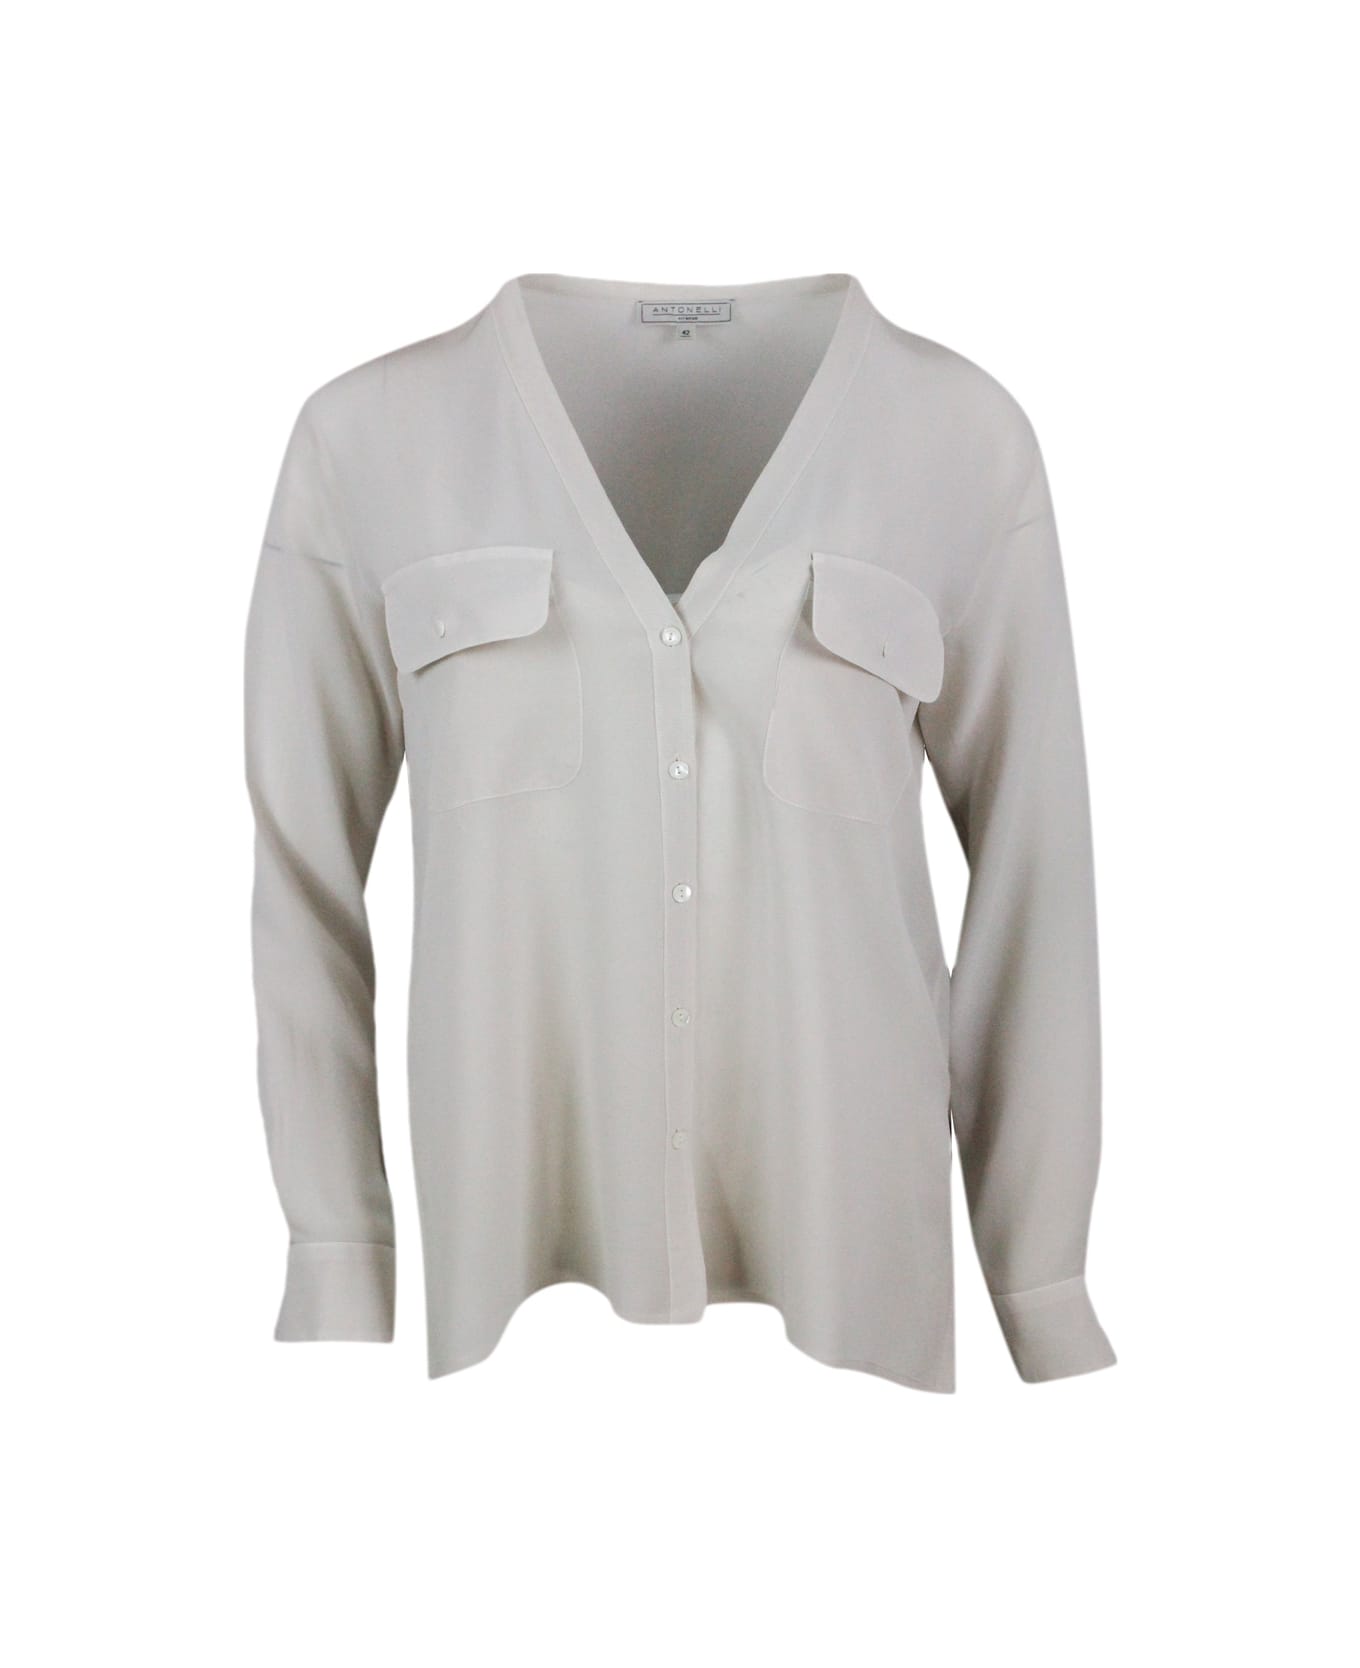 Antonelli Shirt Made Of Soft Stretch Silk, With V-neck, Chest Pockets And Button Closure - Beige シャツ